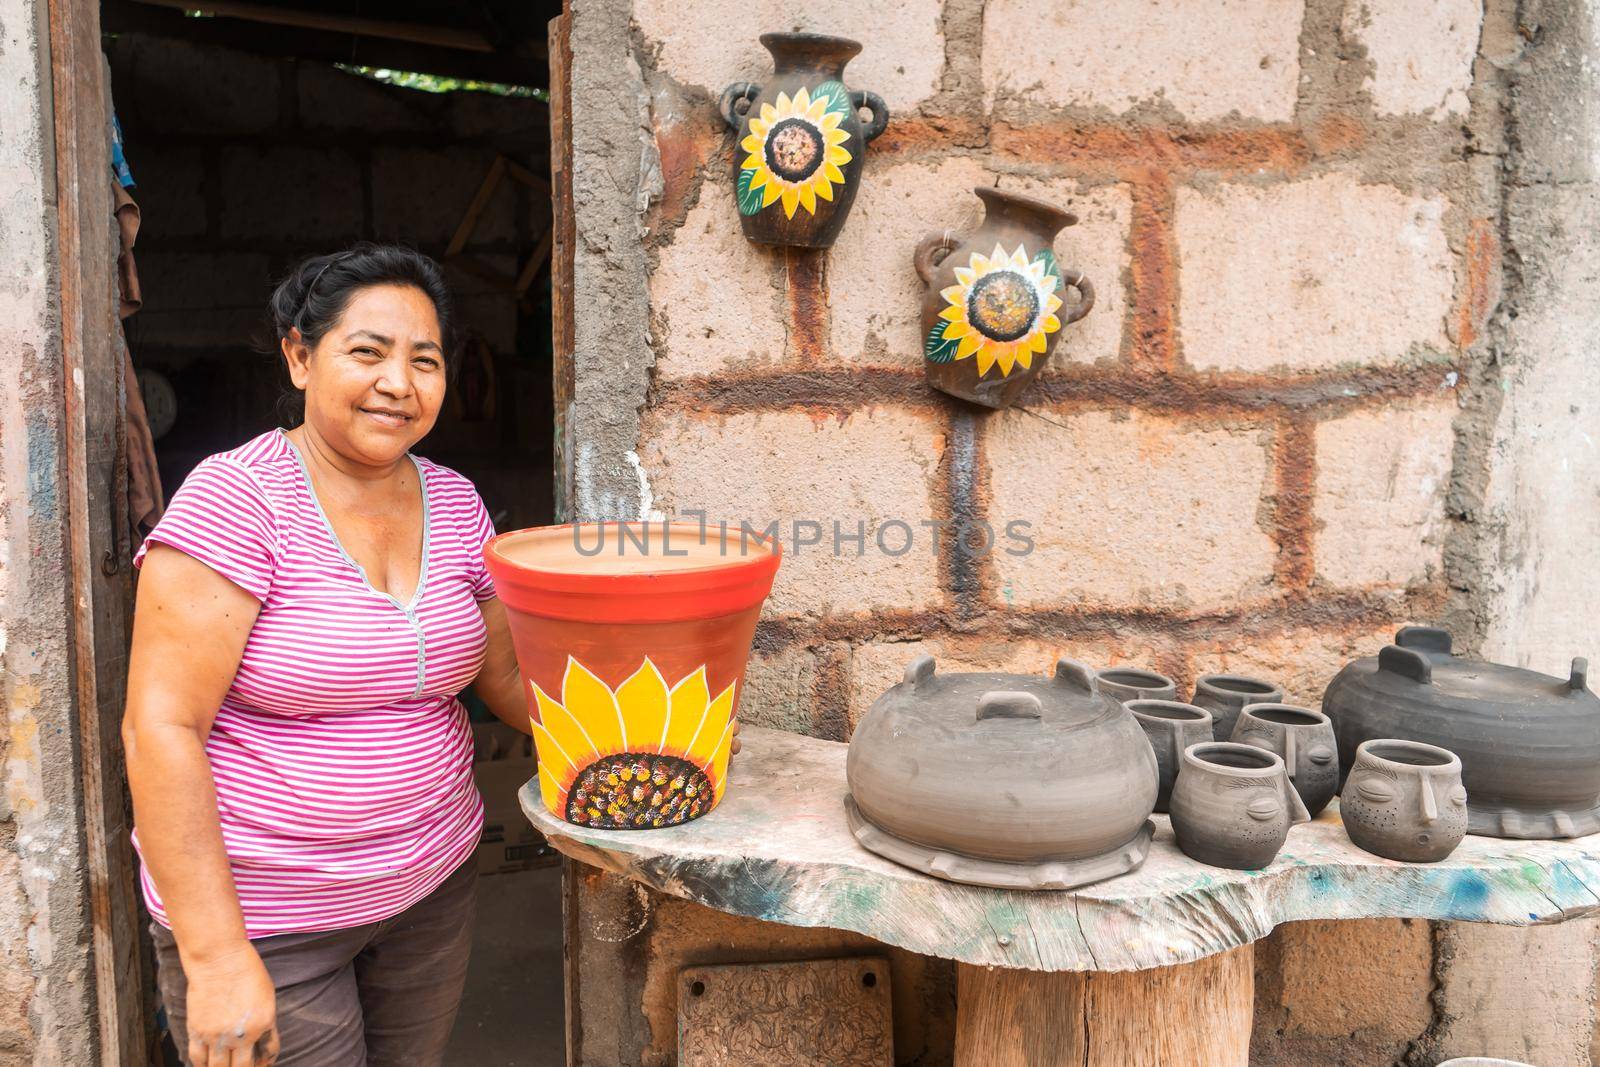 Artisan woman from La Paz Centro Nicaragua posing next to her clay crafts and smiling watching the camera